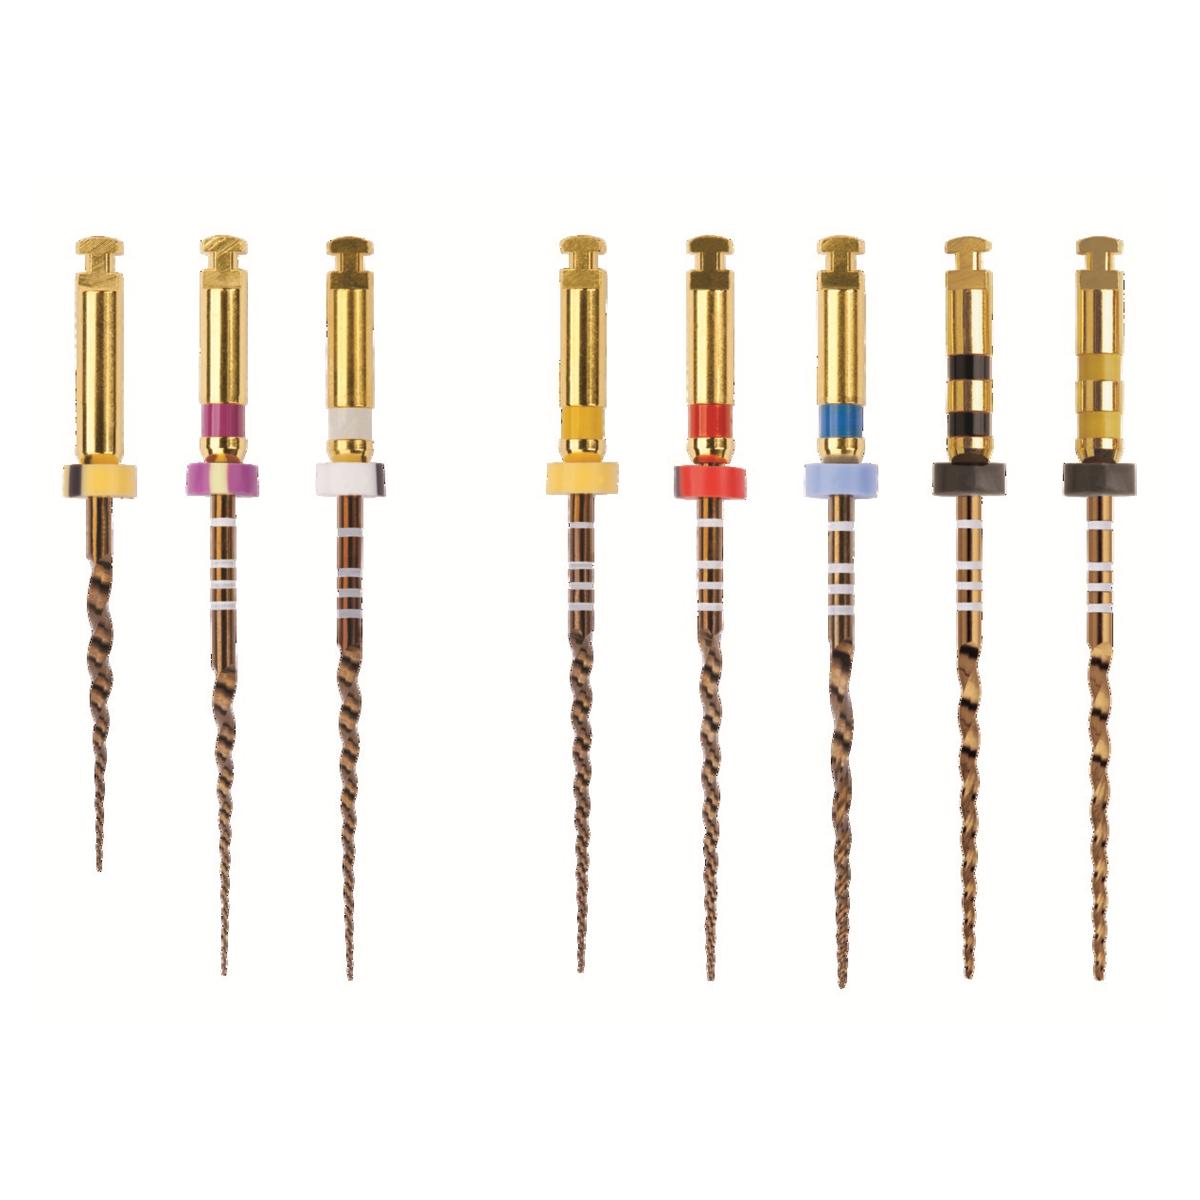 PRO-TAPER GOLD STERILES 21MM S2 (6) MAILLEFER